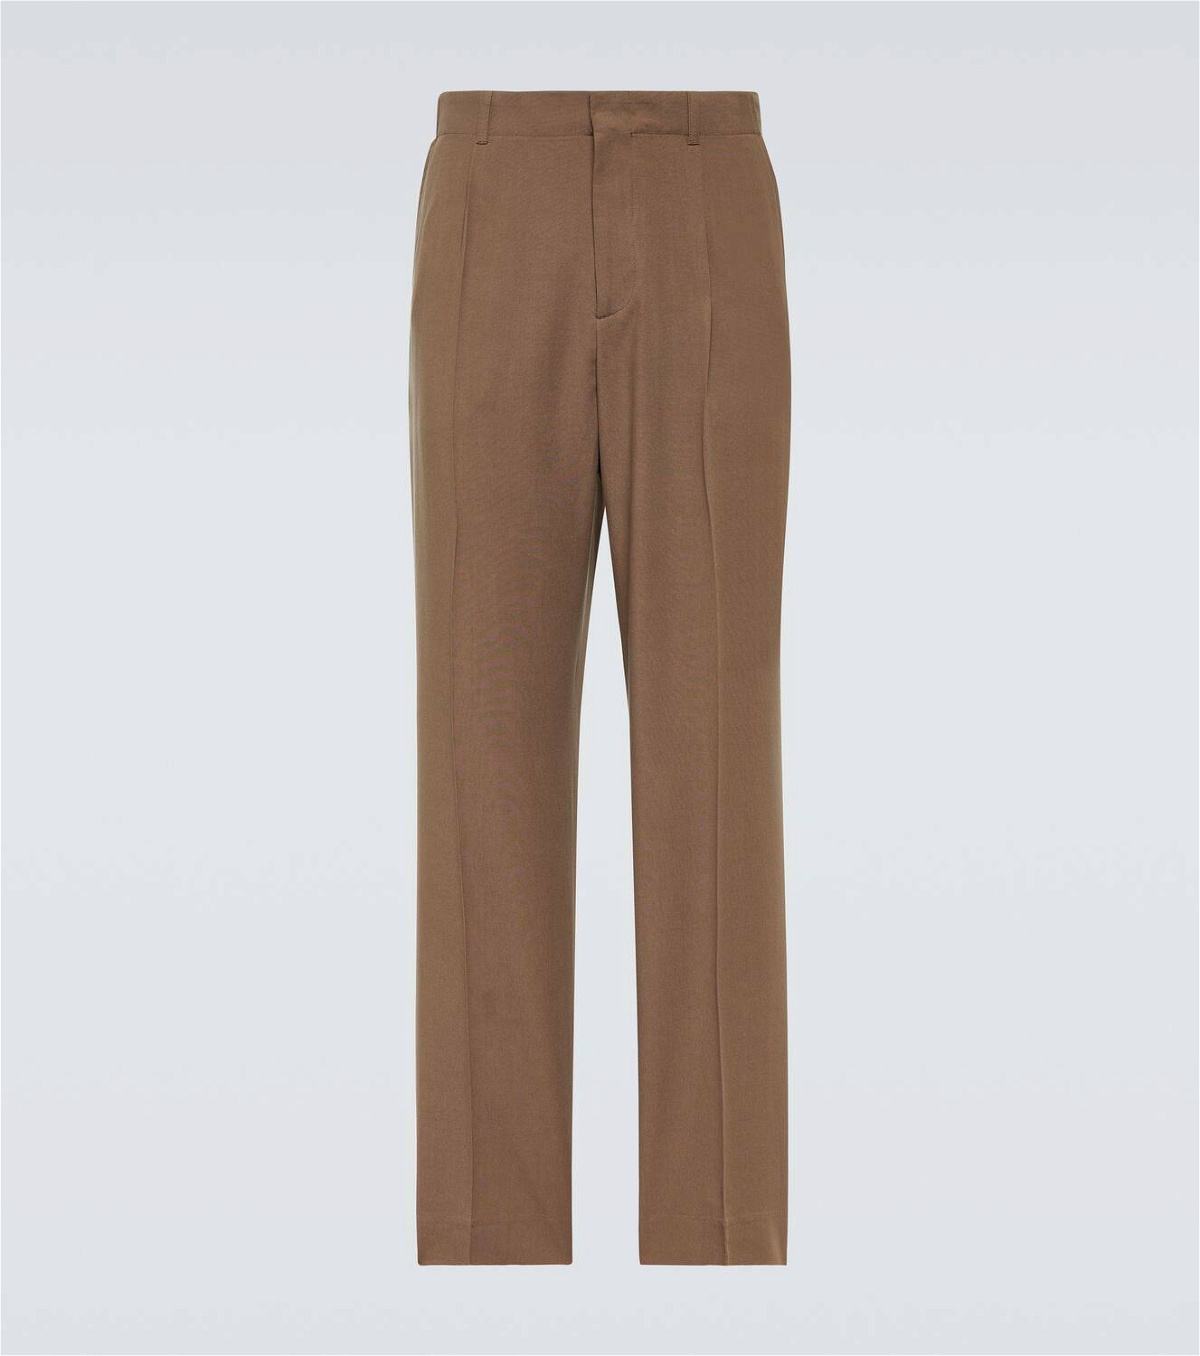 Our Legacy Borrowed wide-leg pants